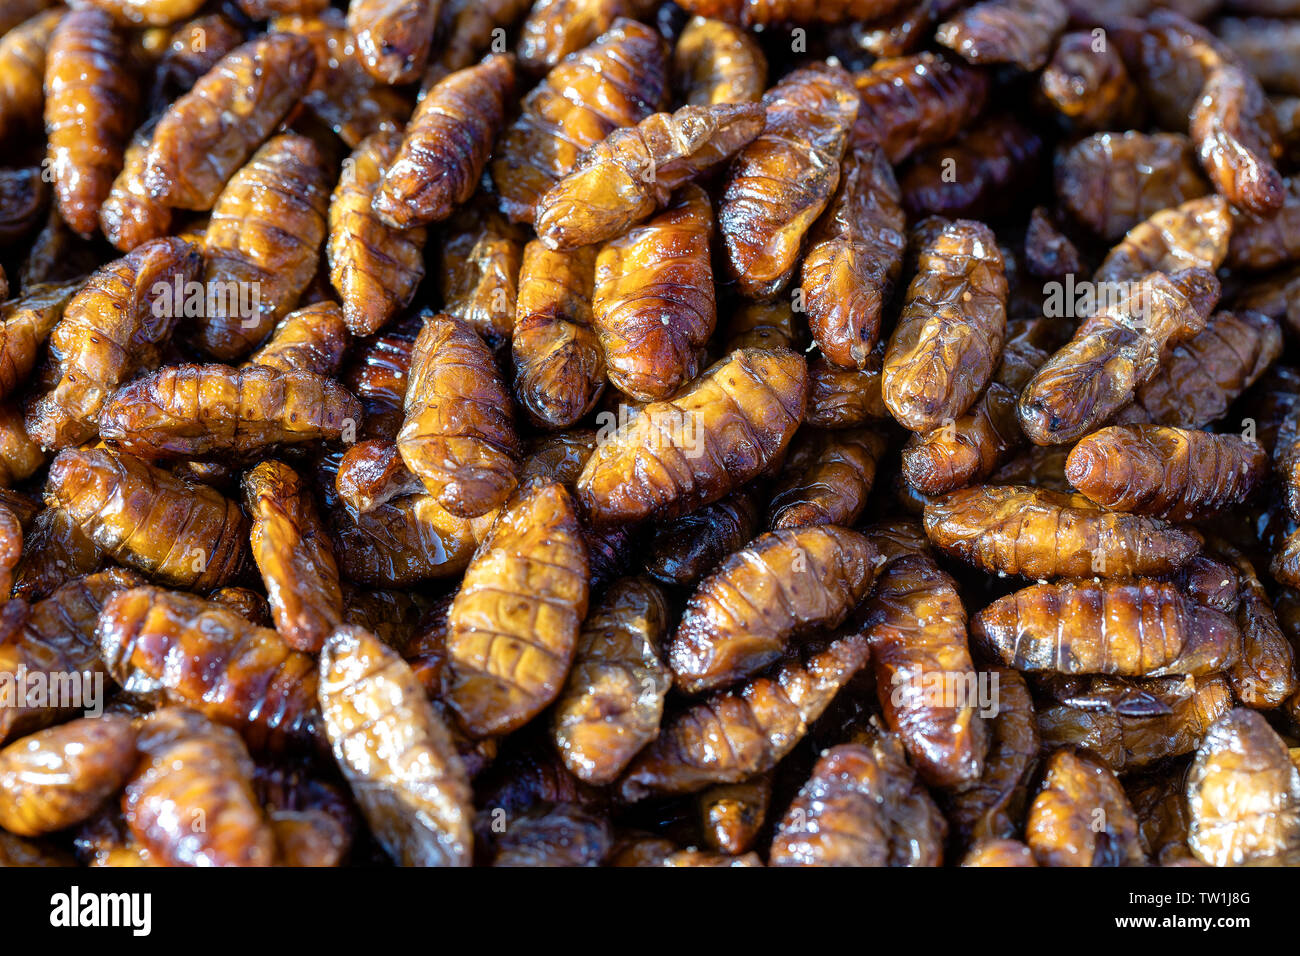 Fried silk worms delicious in street food in Thailand. They are